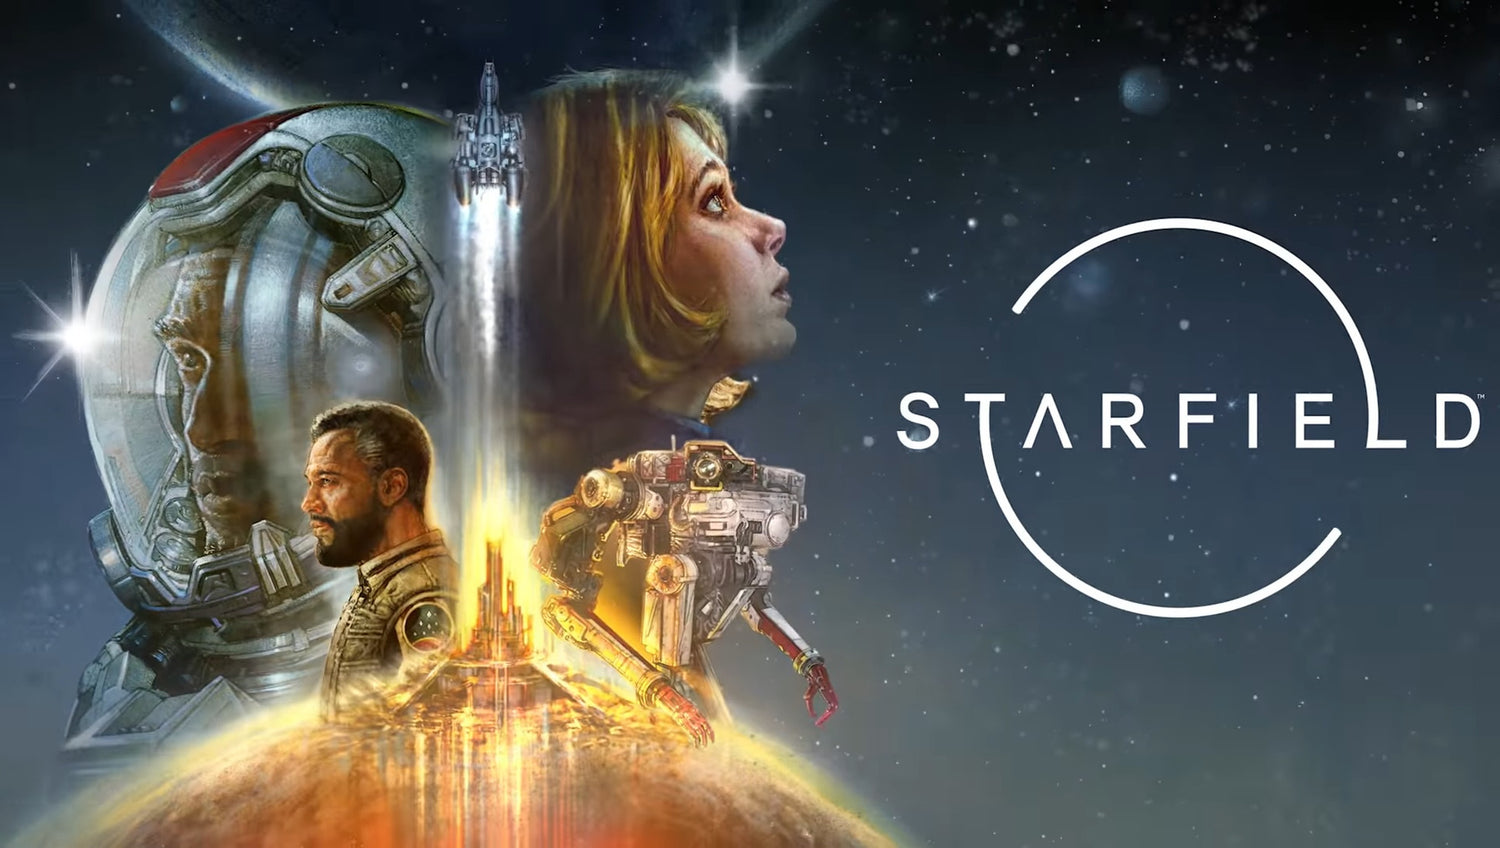 Bethesda's Starfield to be Released on September 6, 2023